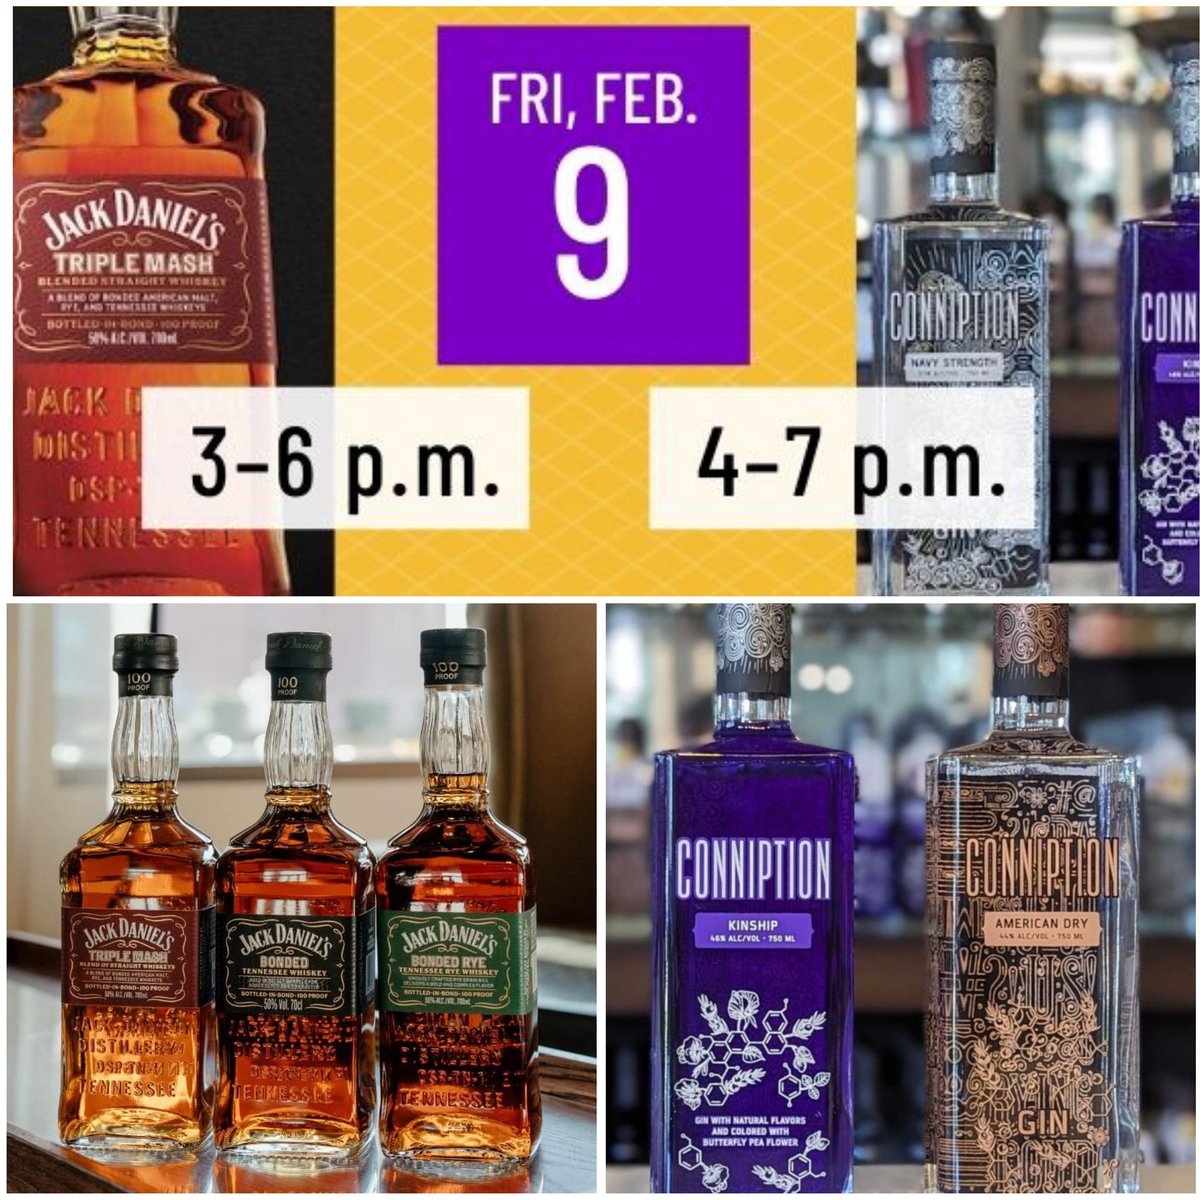 🥃🍸 Join us at today’s #TastingEvent!

🌟 3–6p The bold flavors of Jack Daniel's whiskeys: Rich complexity, smooth finish. 🥃✨ 

🌿 4–7p Don't have a conniption—just try Conniption Gin. Exquisite taste, balanced botanicals. 🍸🌺

instagram.com/p/C3Igv3NOTdl/ #Buffalo #BuffaloNY